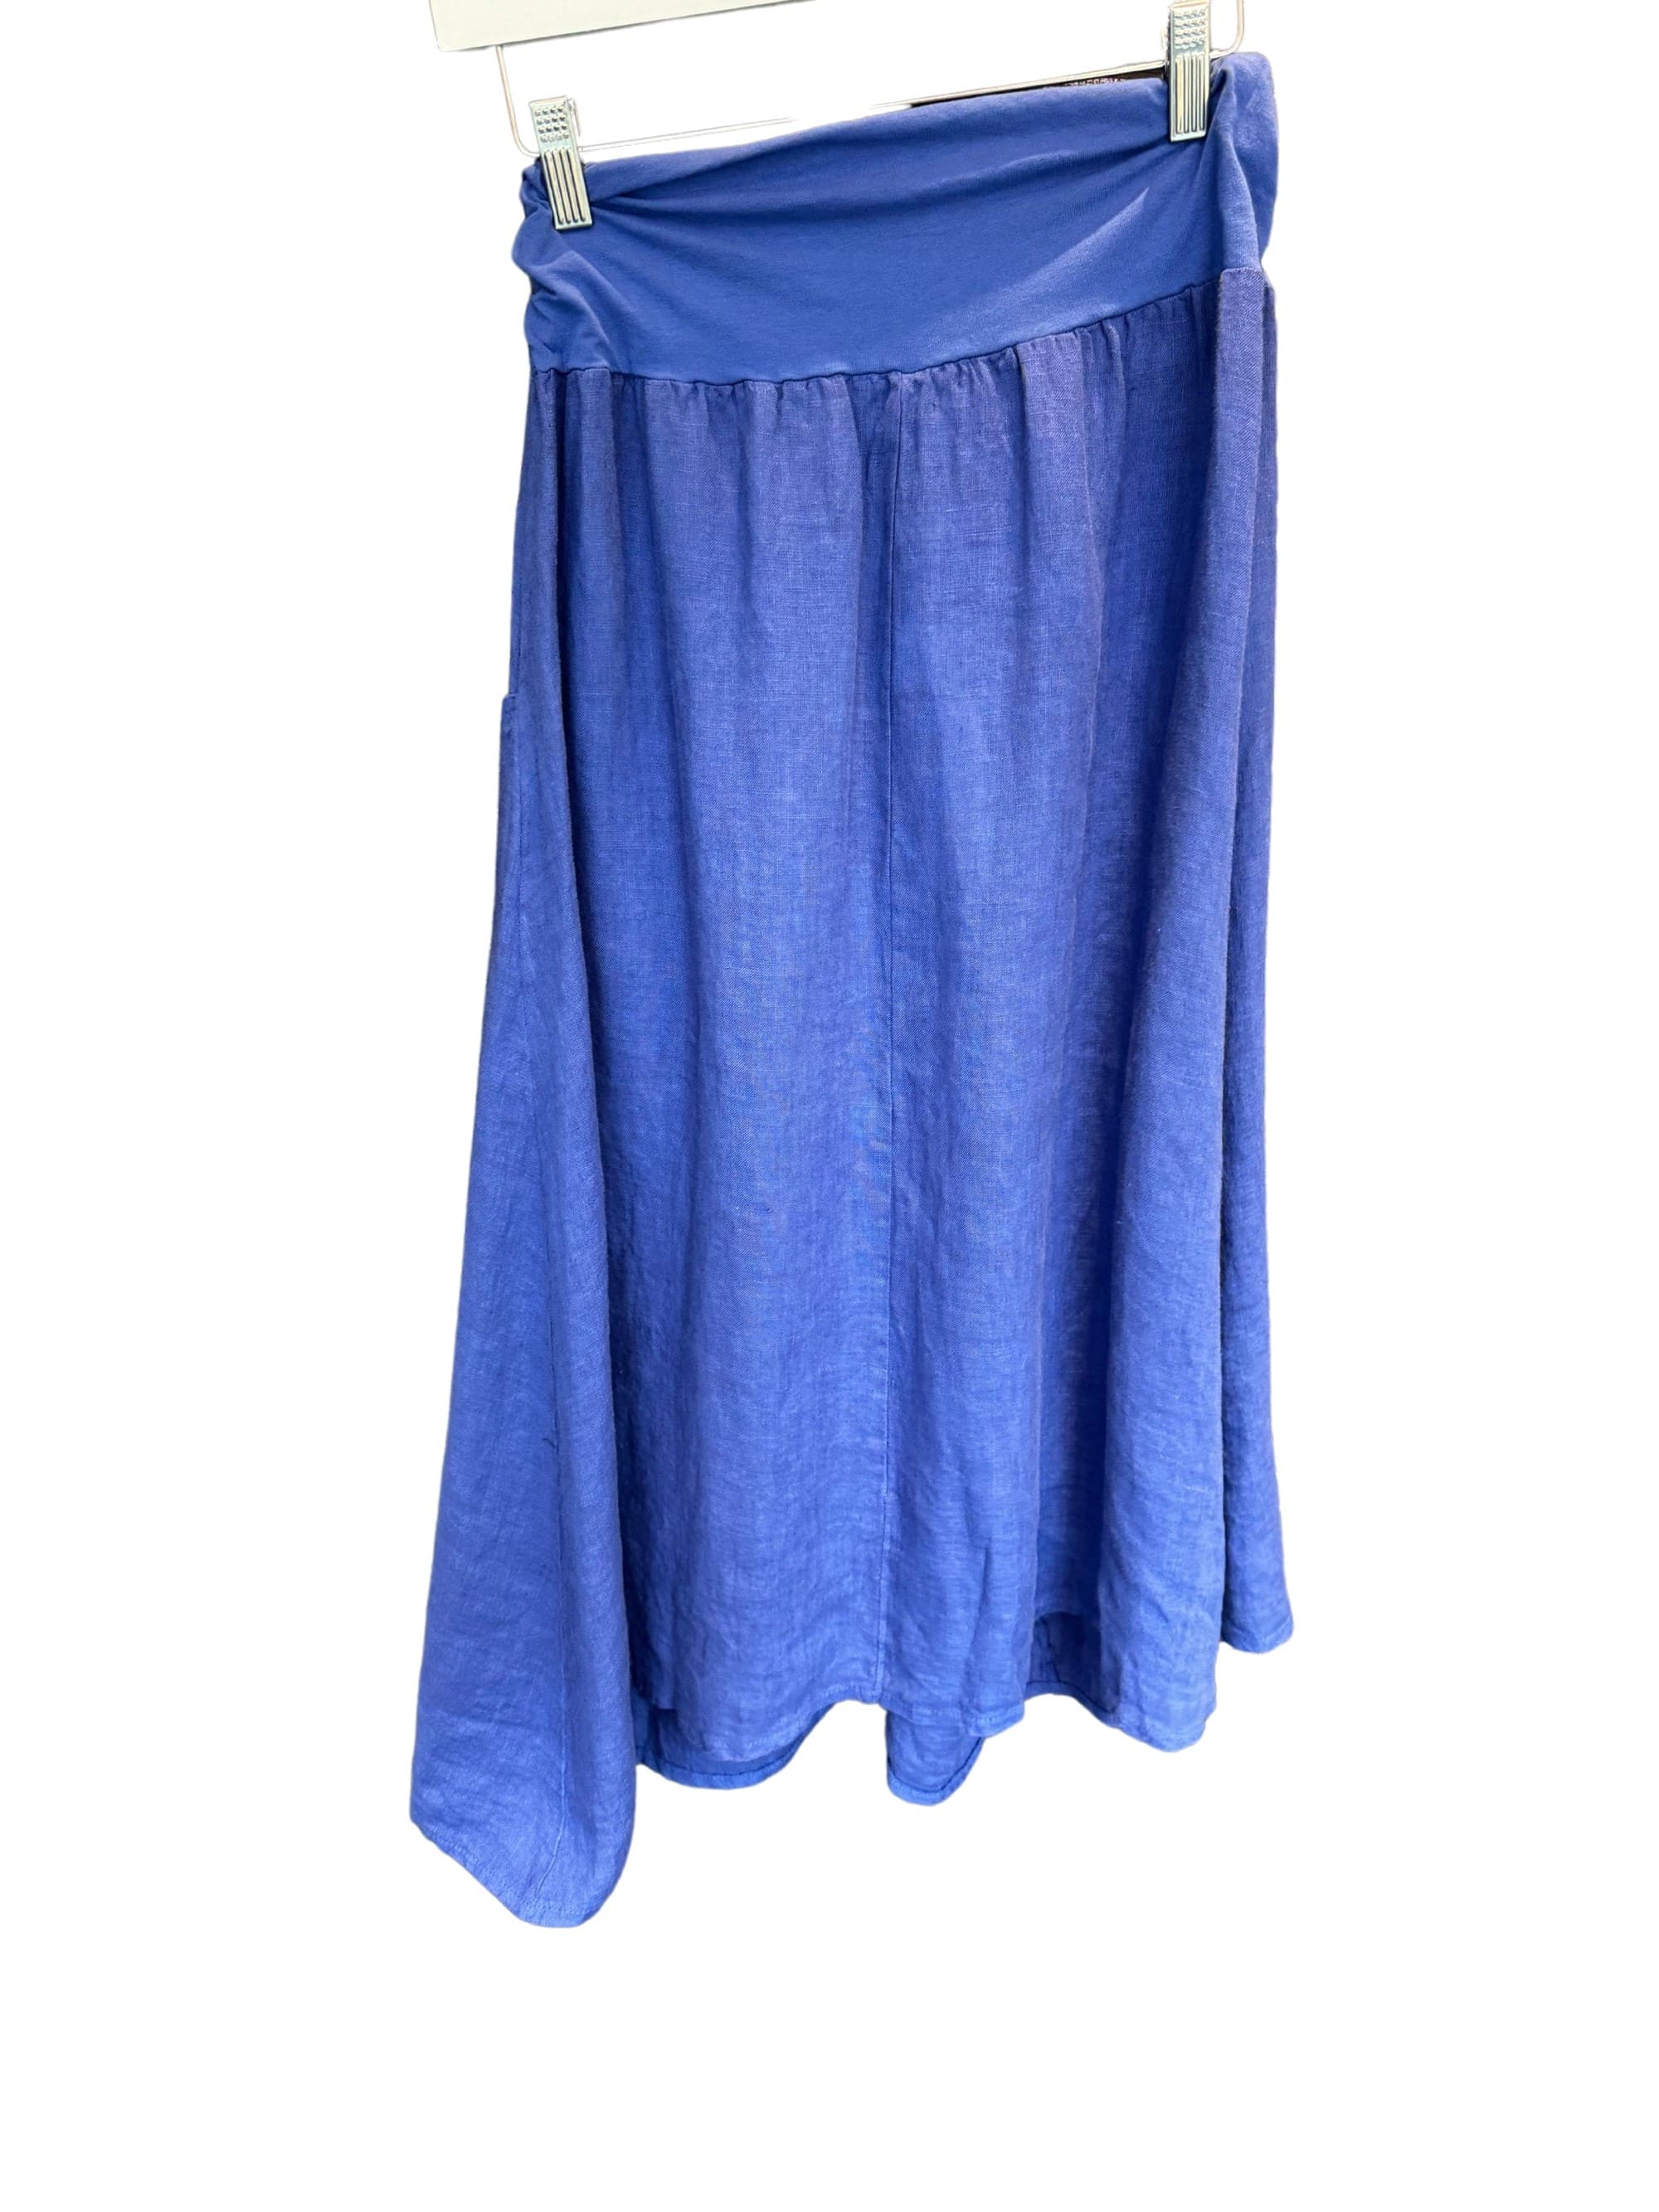 Inizio Linen Skirt in Blueberry - clever alice